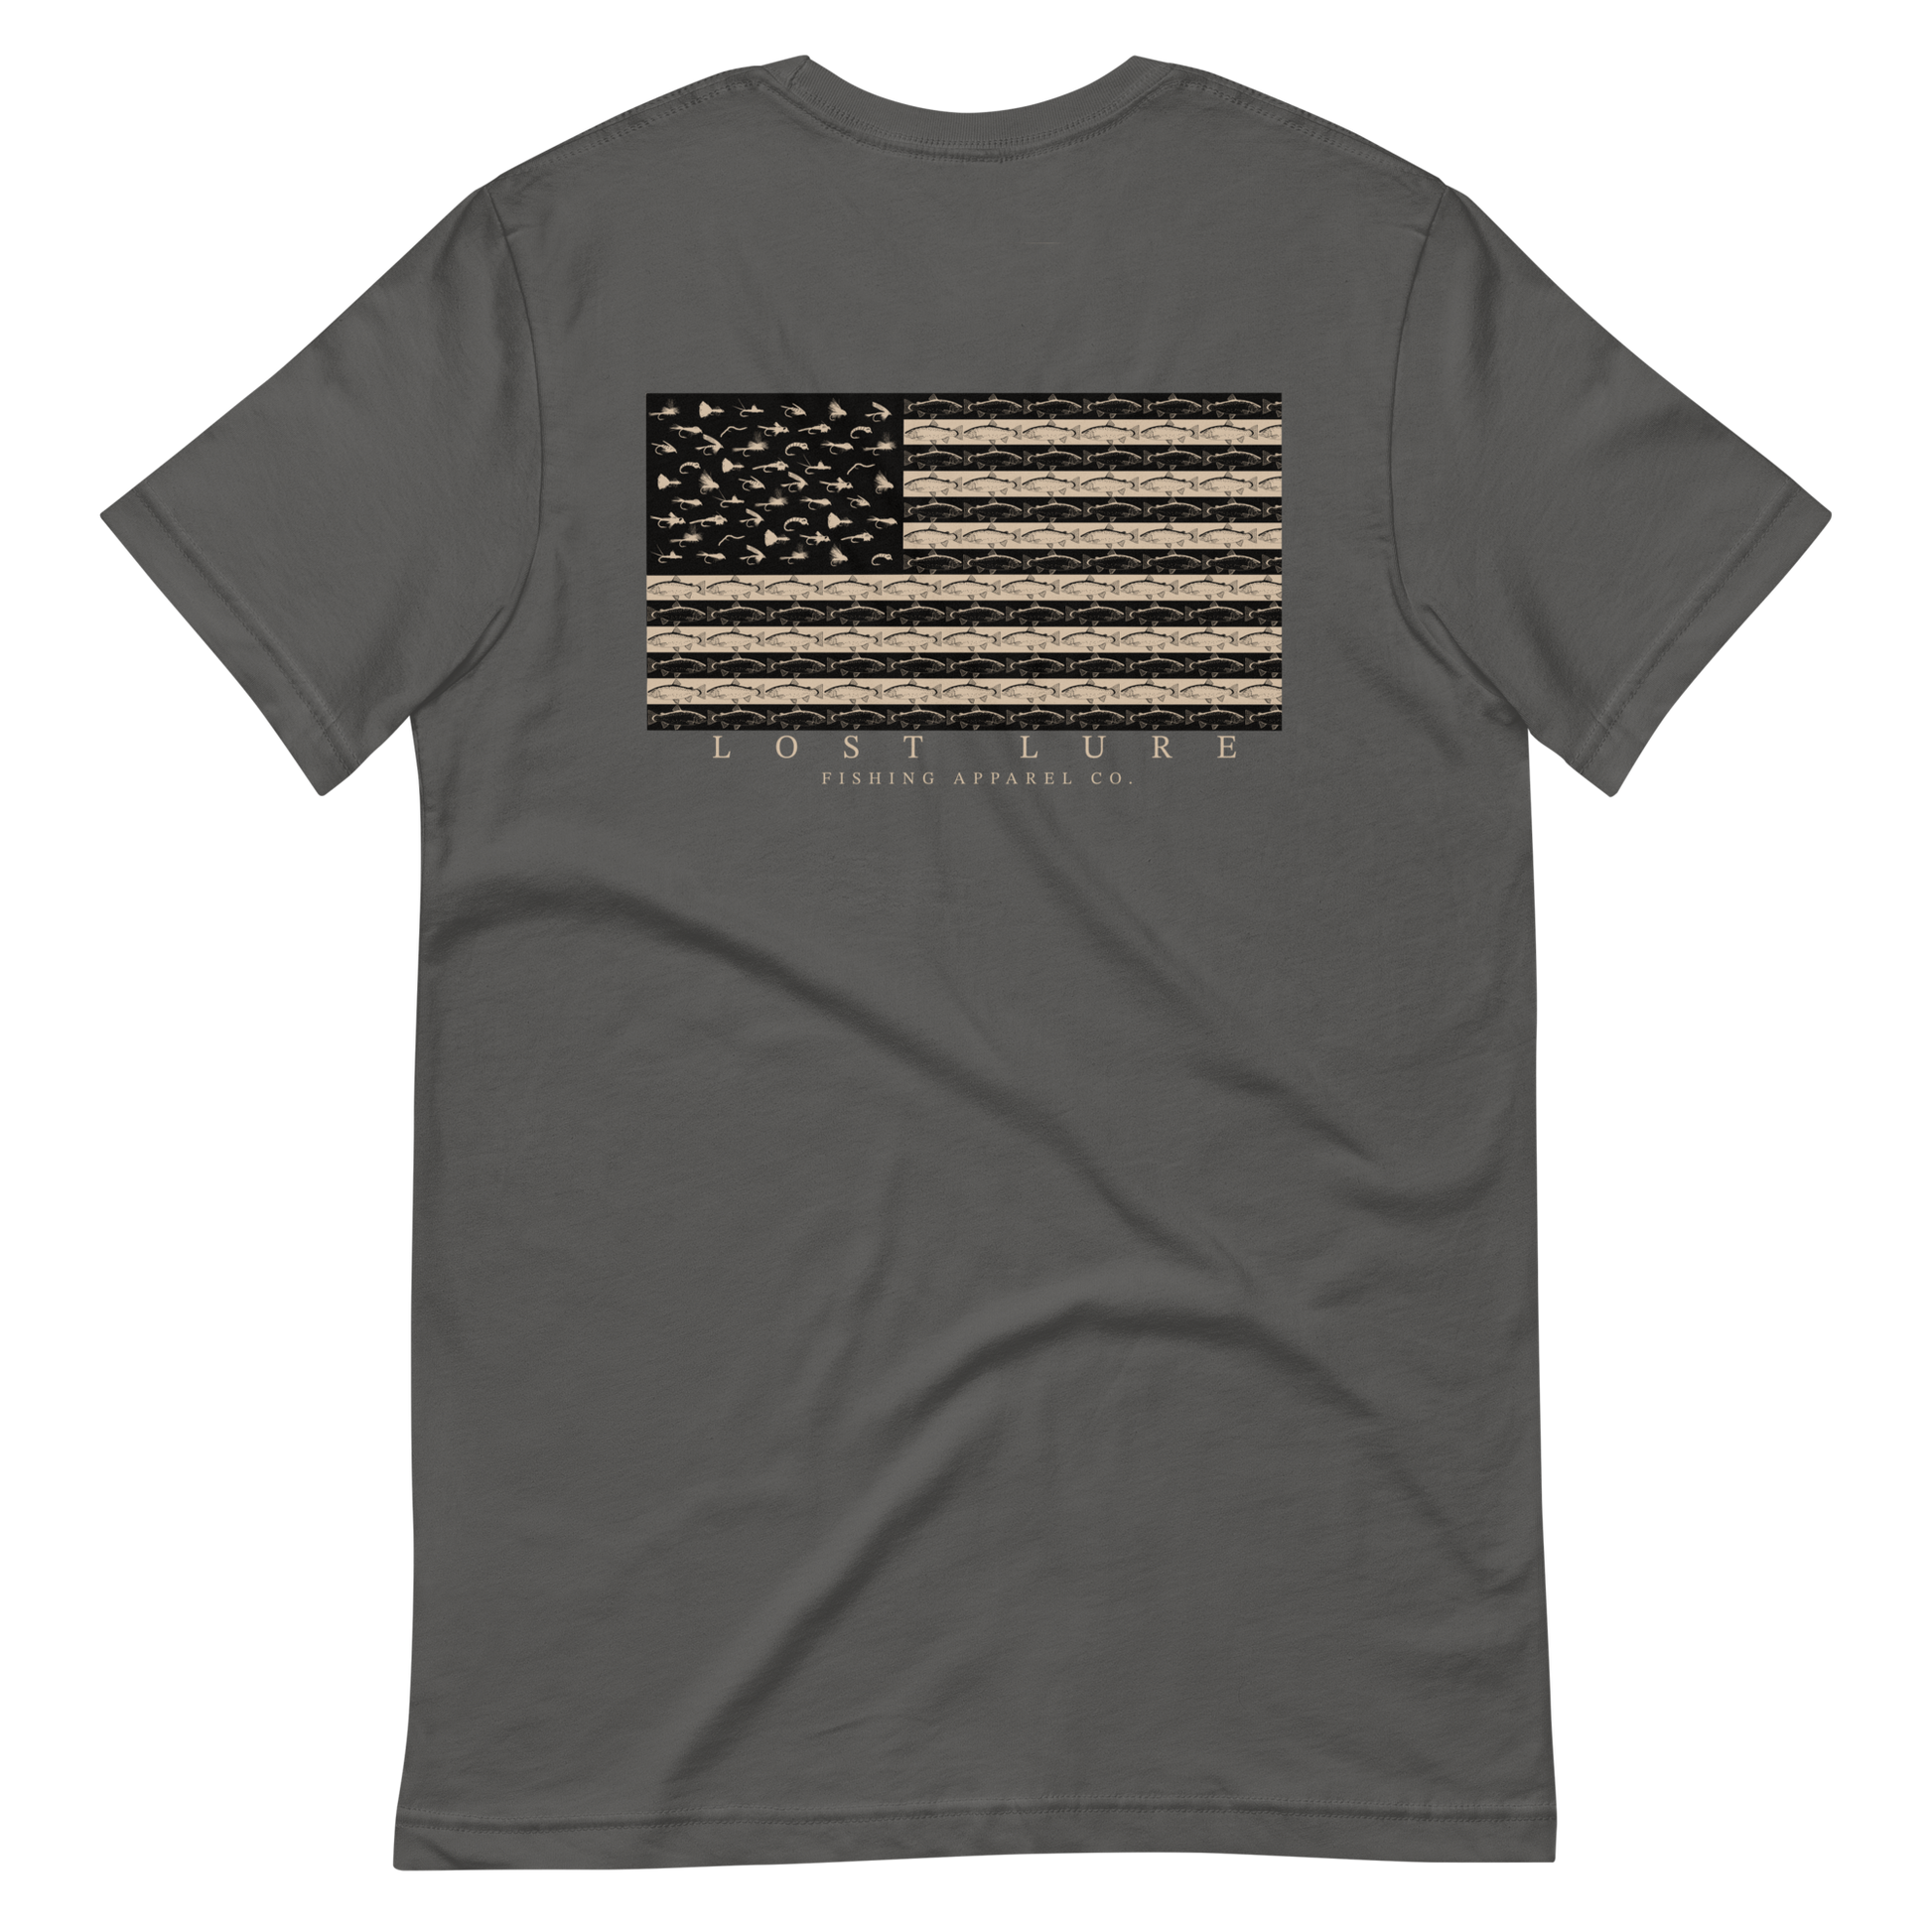 Fishing T-shirt with American Flag, Fly Fishing Shirt, Fishing Gear, Fishing  Gifts Idea for American Fishers - Print your thoughts. Tell your stories.